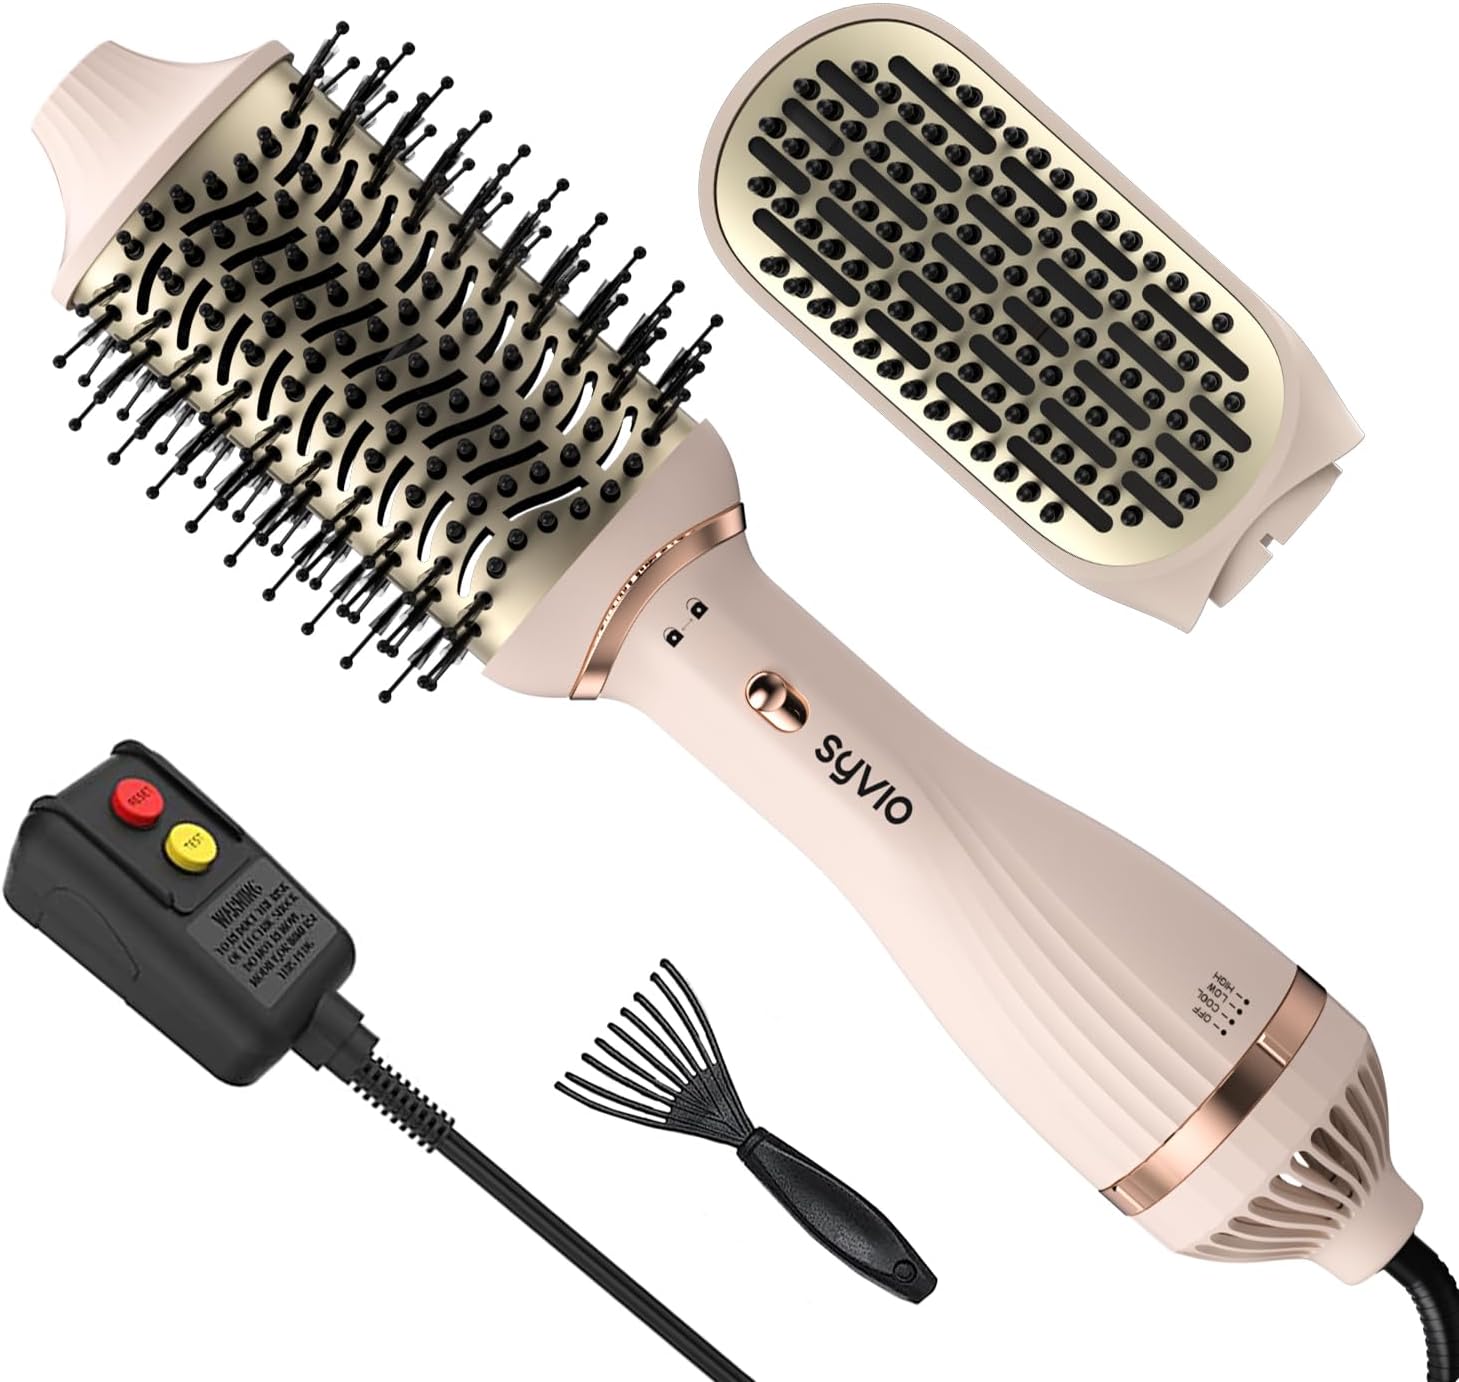 My last one I had got fried when I tried to use it on a cruise. (Must be included with hair dryers).I looked up the best blow out brushes. This was on the list. It came apart for easier packing and we travel a lot. Even better, it was on sale. And had a straightening brush. (Didnt even know that was a thing. lol). I finally tried it for the first time, I pulled it out of the box and didnt even need to read the directions on how to change the brushes. Changed the brush and used it. It worked GR